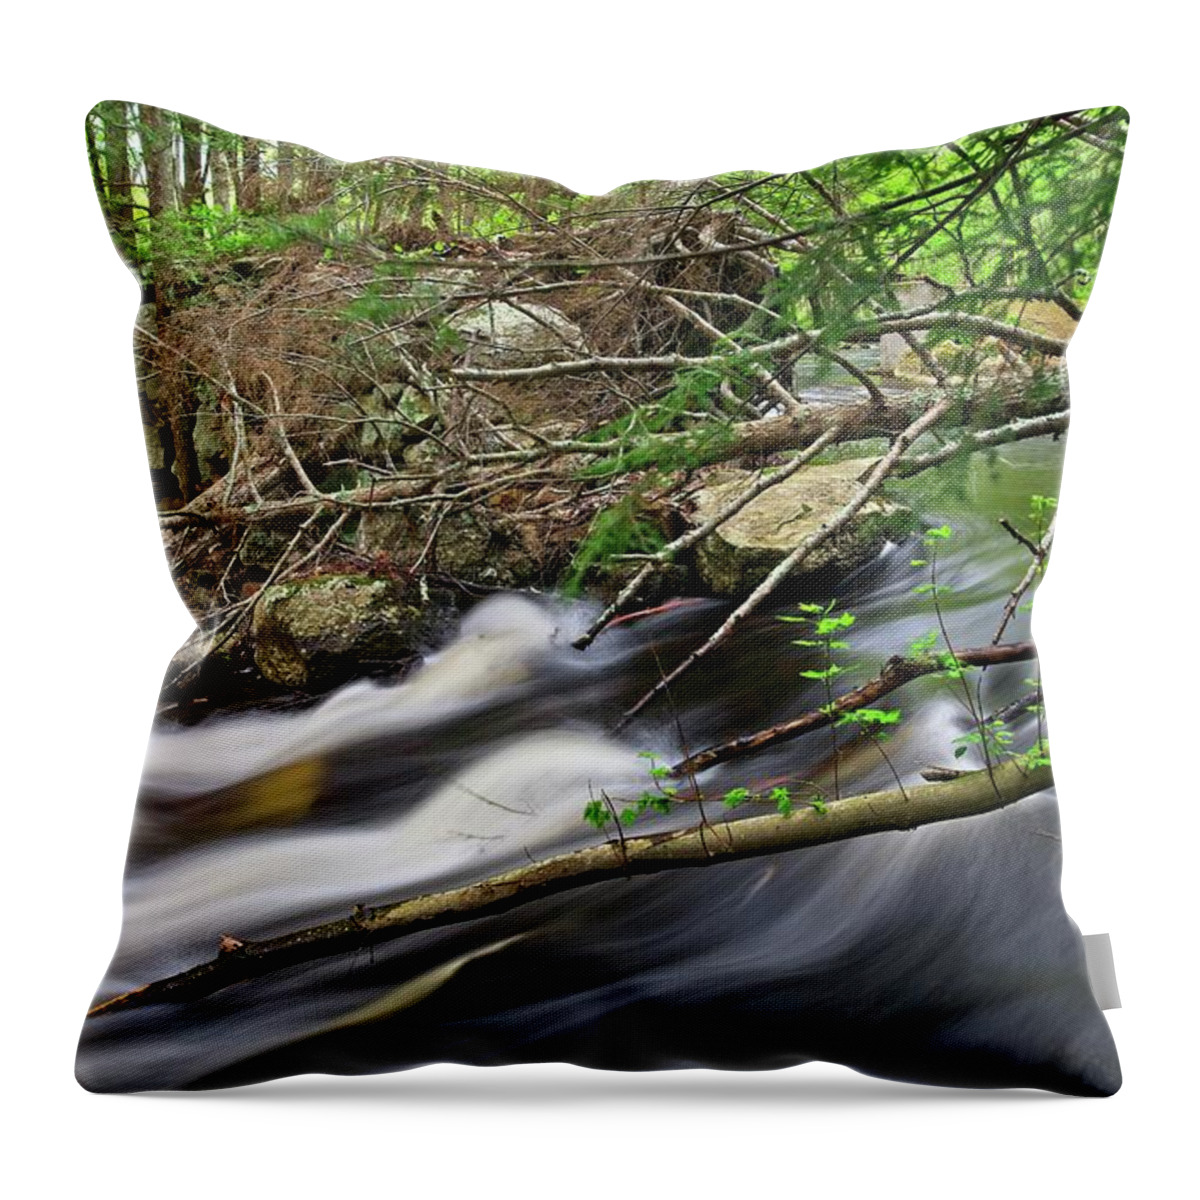 Waterfall Throw Pillow featuring the photograph What Lies Beneath by Allan Van Gasbeck